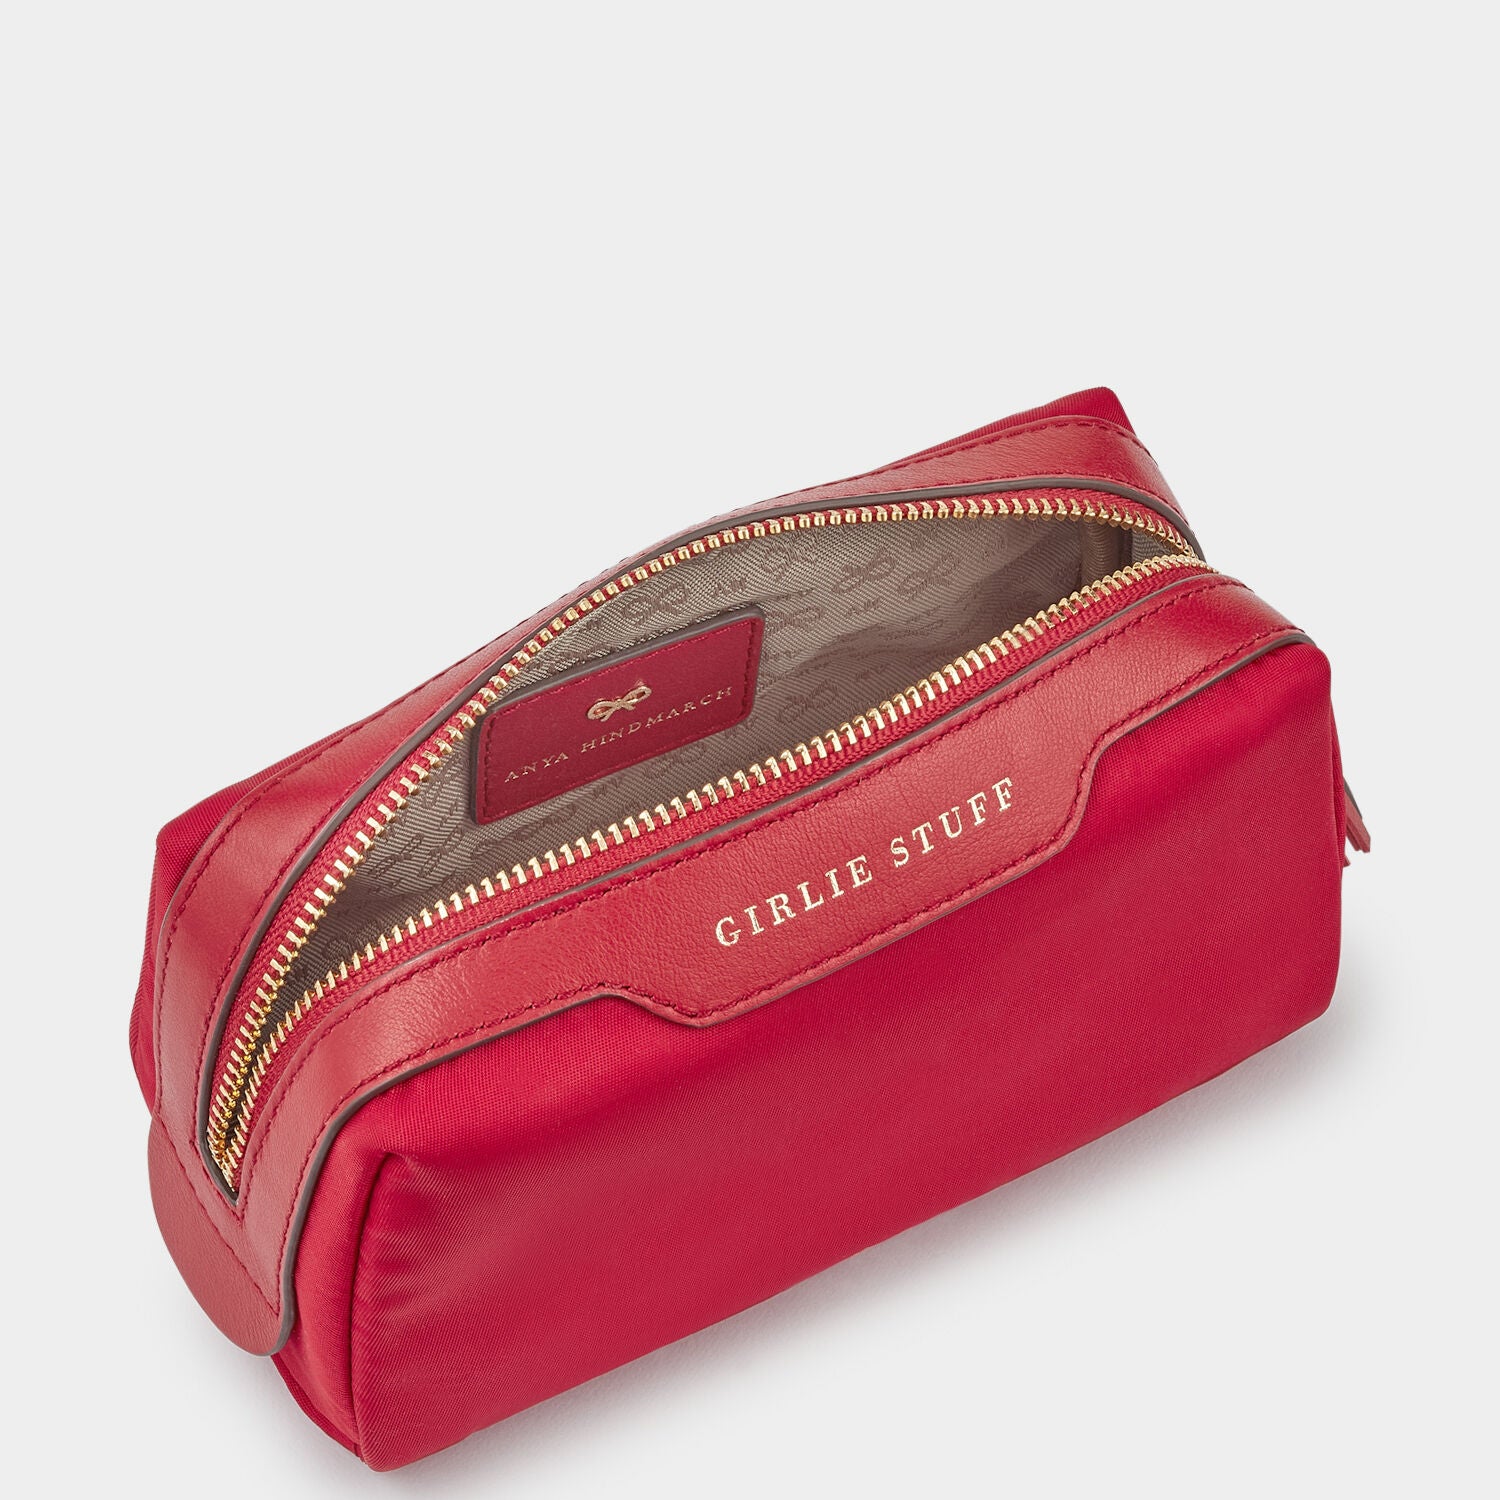 Girlie Stuff -

                  
                    Recycled Nylon in Red -
                  

                  Anya Hindmarch UK
